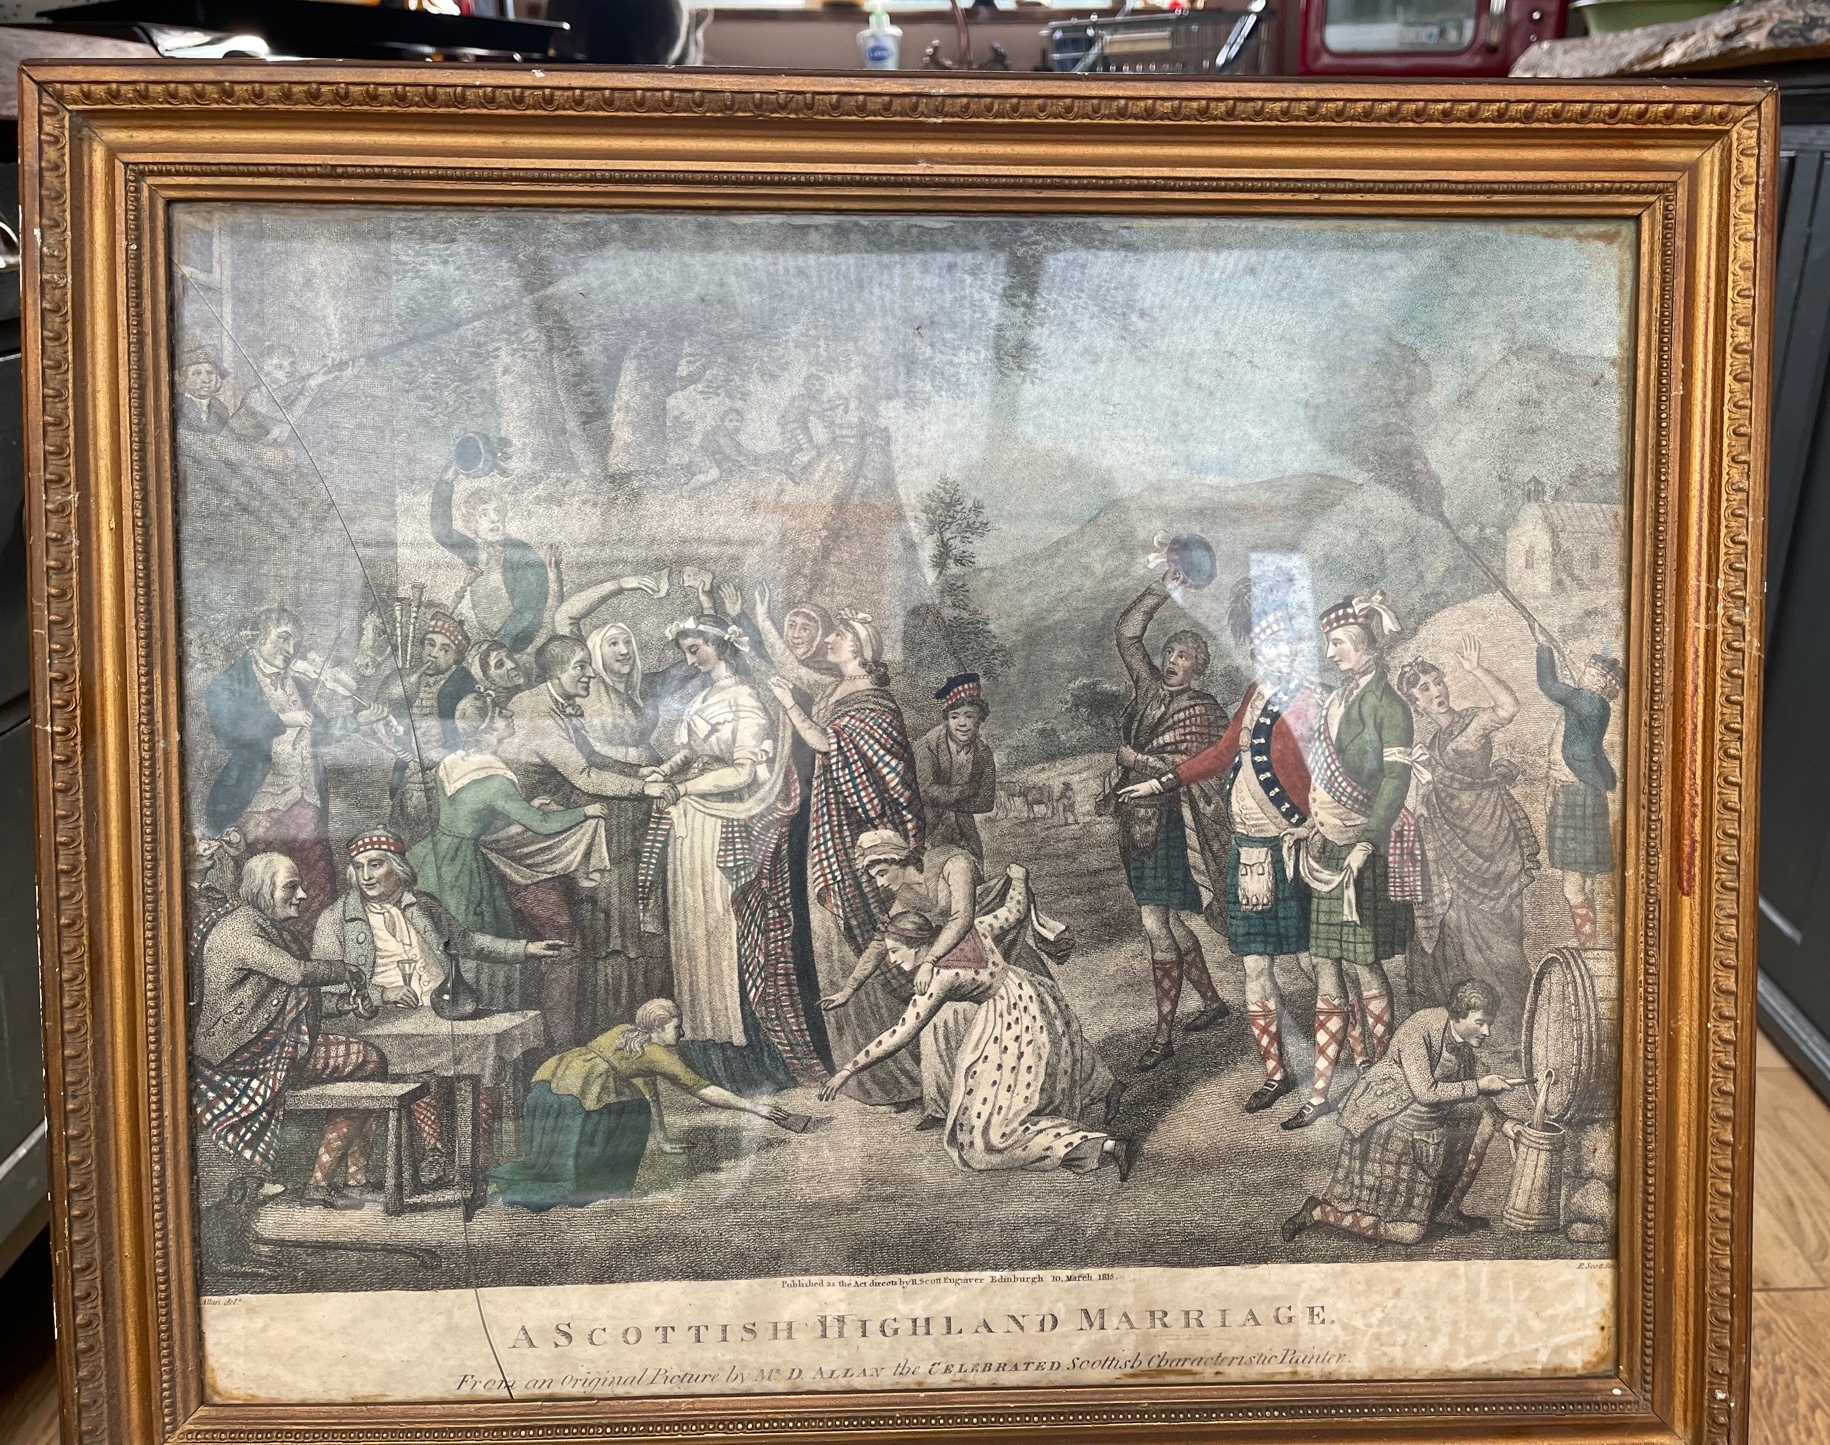 Antique 1815 Framed Engraving "A Scottish Highland Marriage" - actual engraving 13 5/8" x 9 1/2". - Image 2 of 6